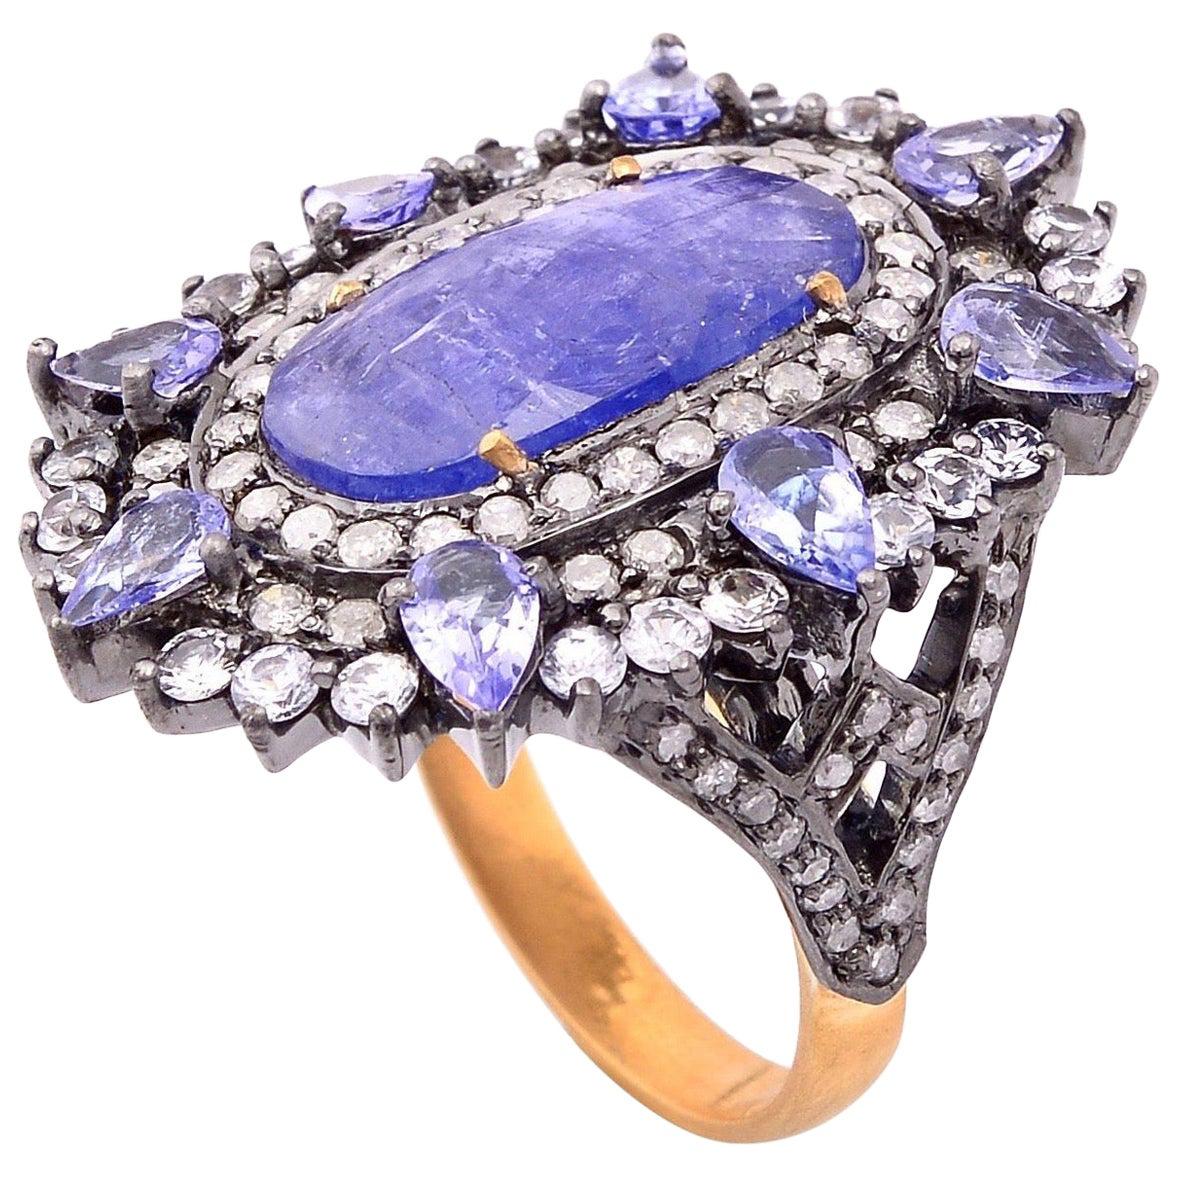 For Sale:  5.25 Carat Tanzanite Sapphire Cocktail Ring